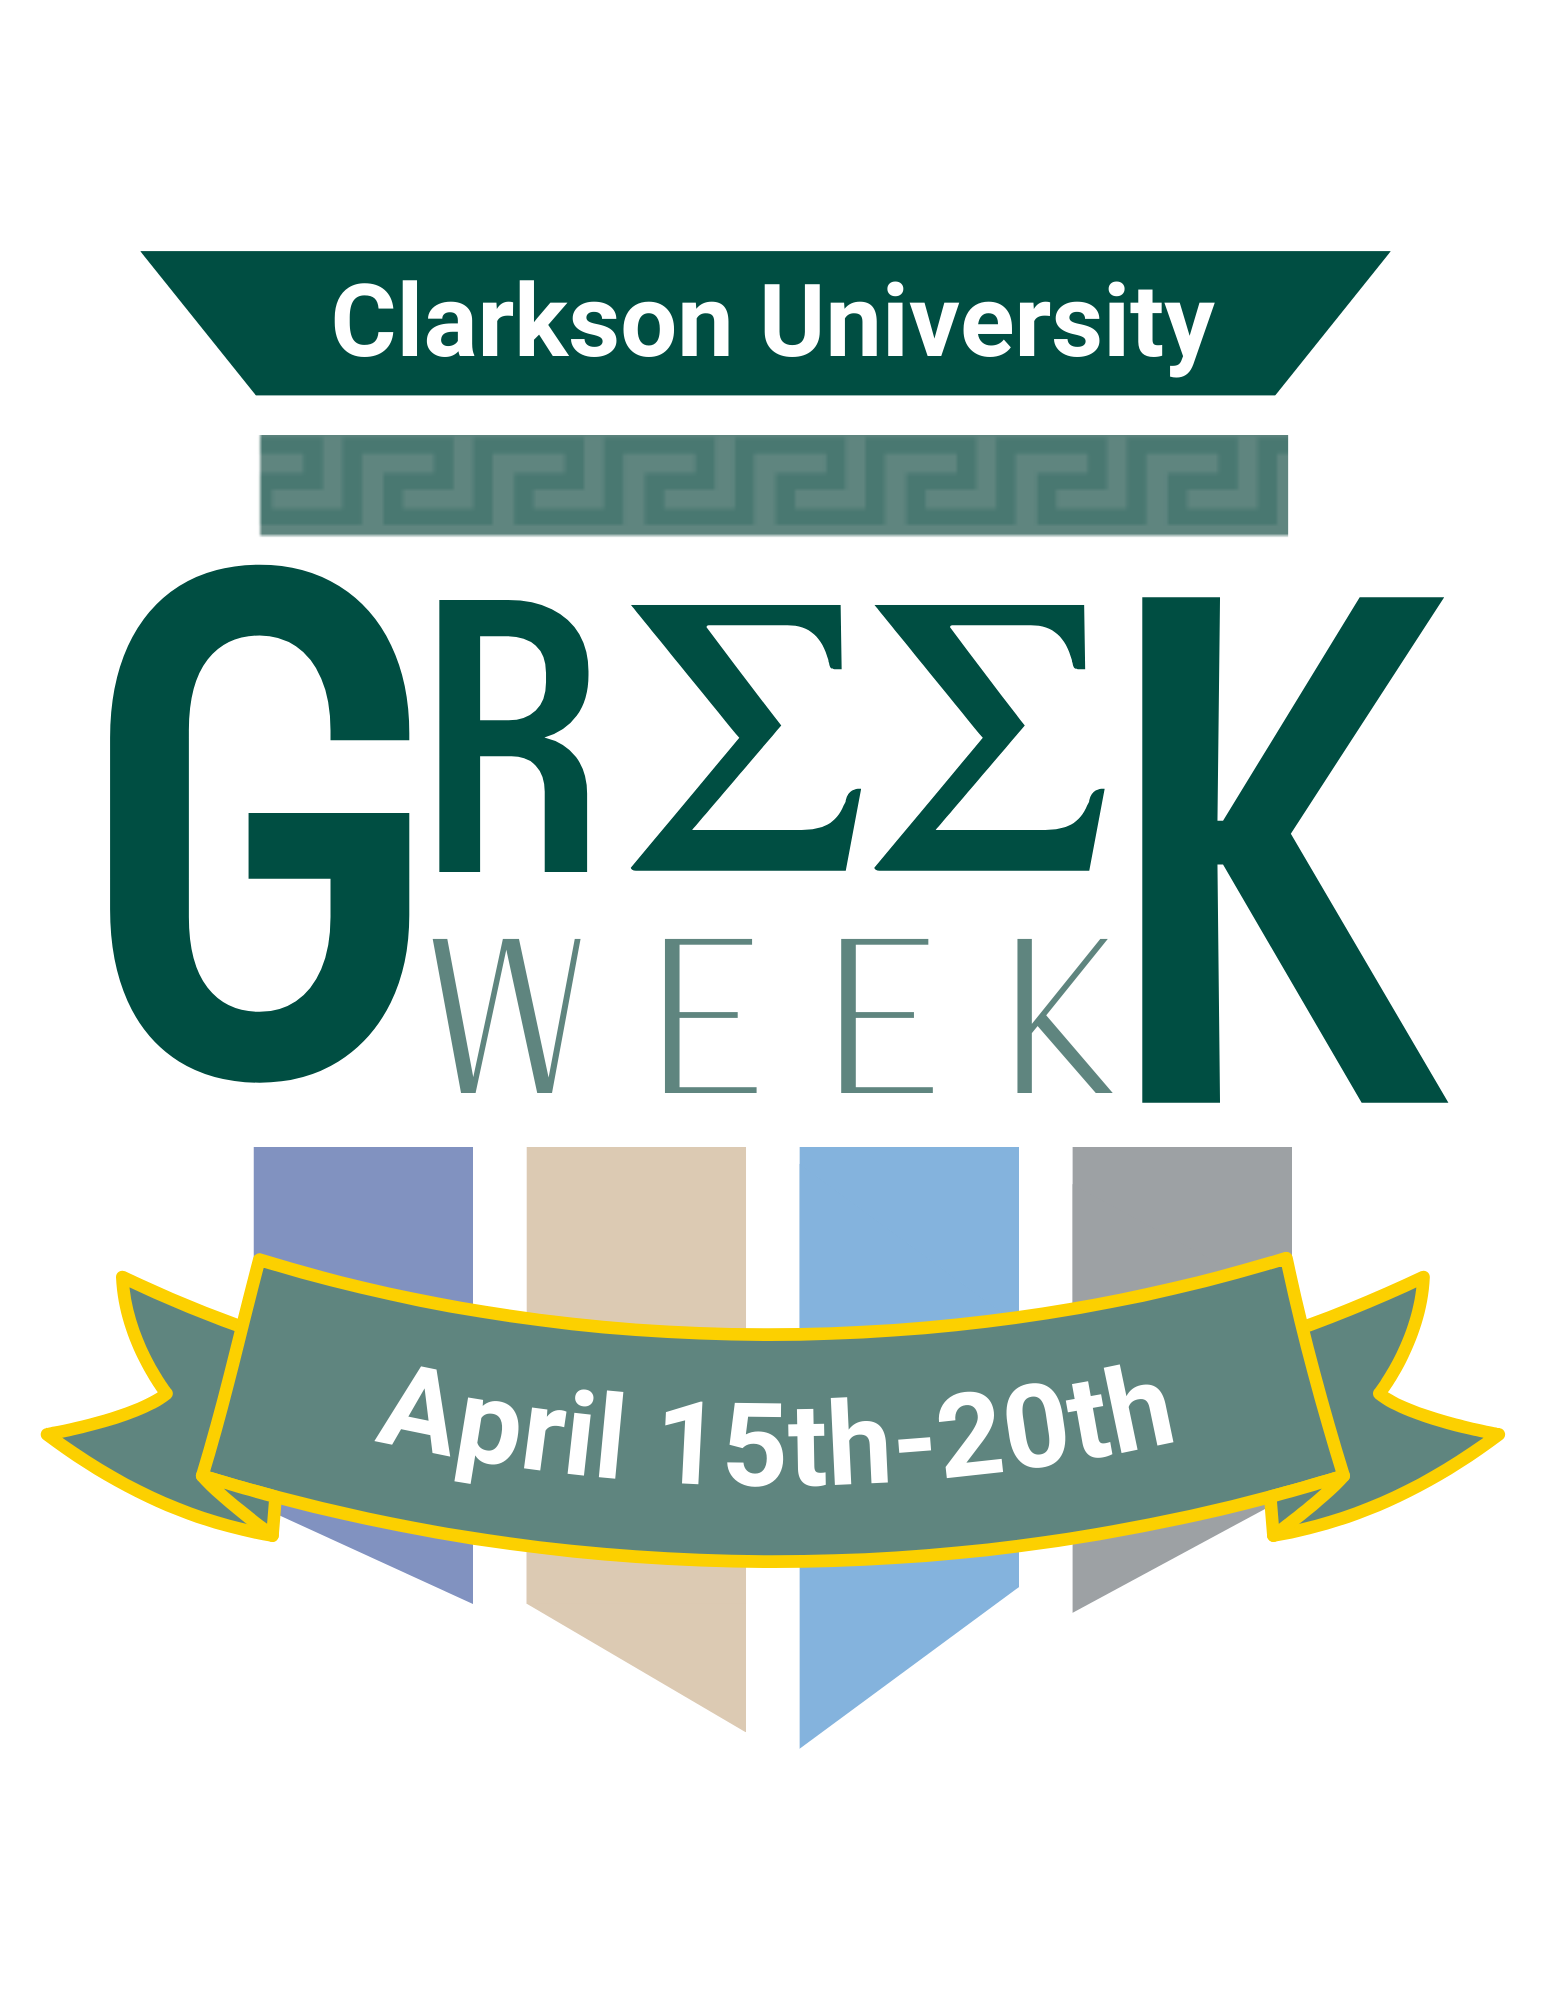 Flyer with green and white background advertising Clarkson University's Greek Week. Greek is capitalized with two sigma signs replacing the "EE" in the word. A banner across the bottom of the flyer indicated the dates April 15-20 as expressed in the announcement